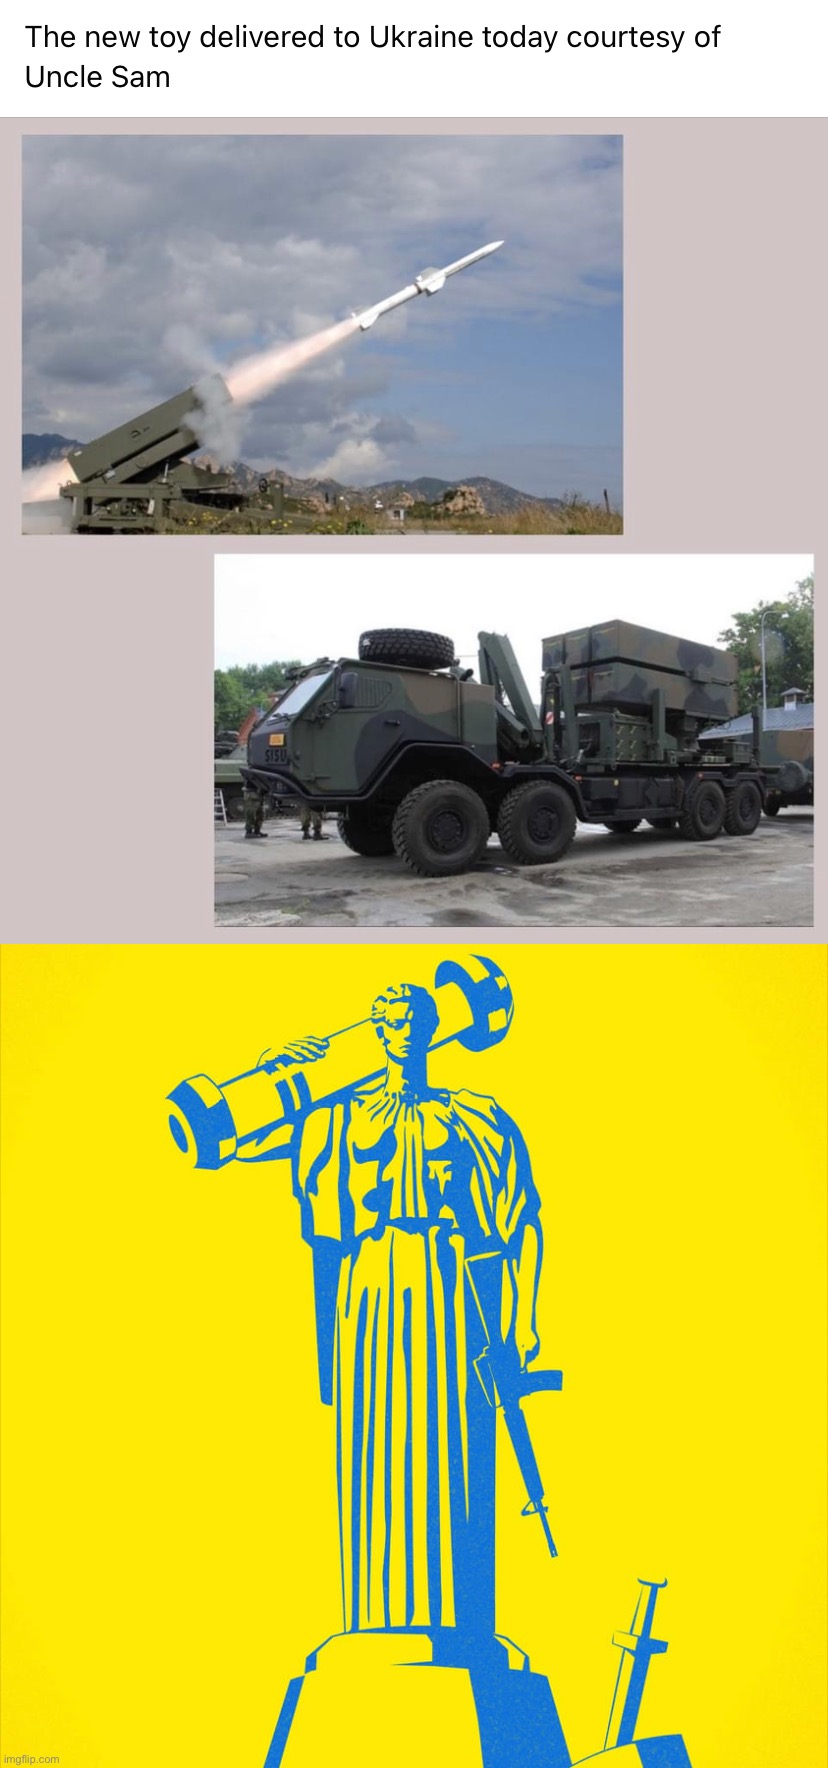 New toys for Ukraine! —Love, Lady Liberty | image tagged in ukraine armament,lady liberty with nlaw,ukraine,lady liberty,ukrainian lives matter,freedom | made w/ Imgflip meme maker